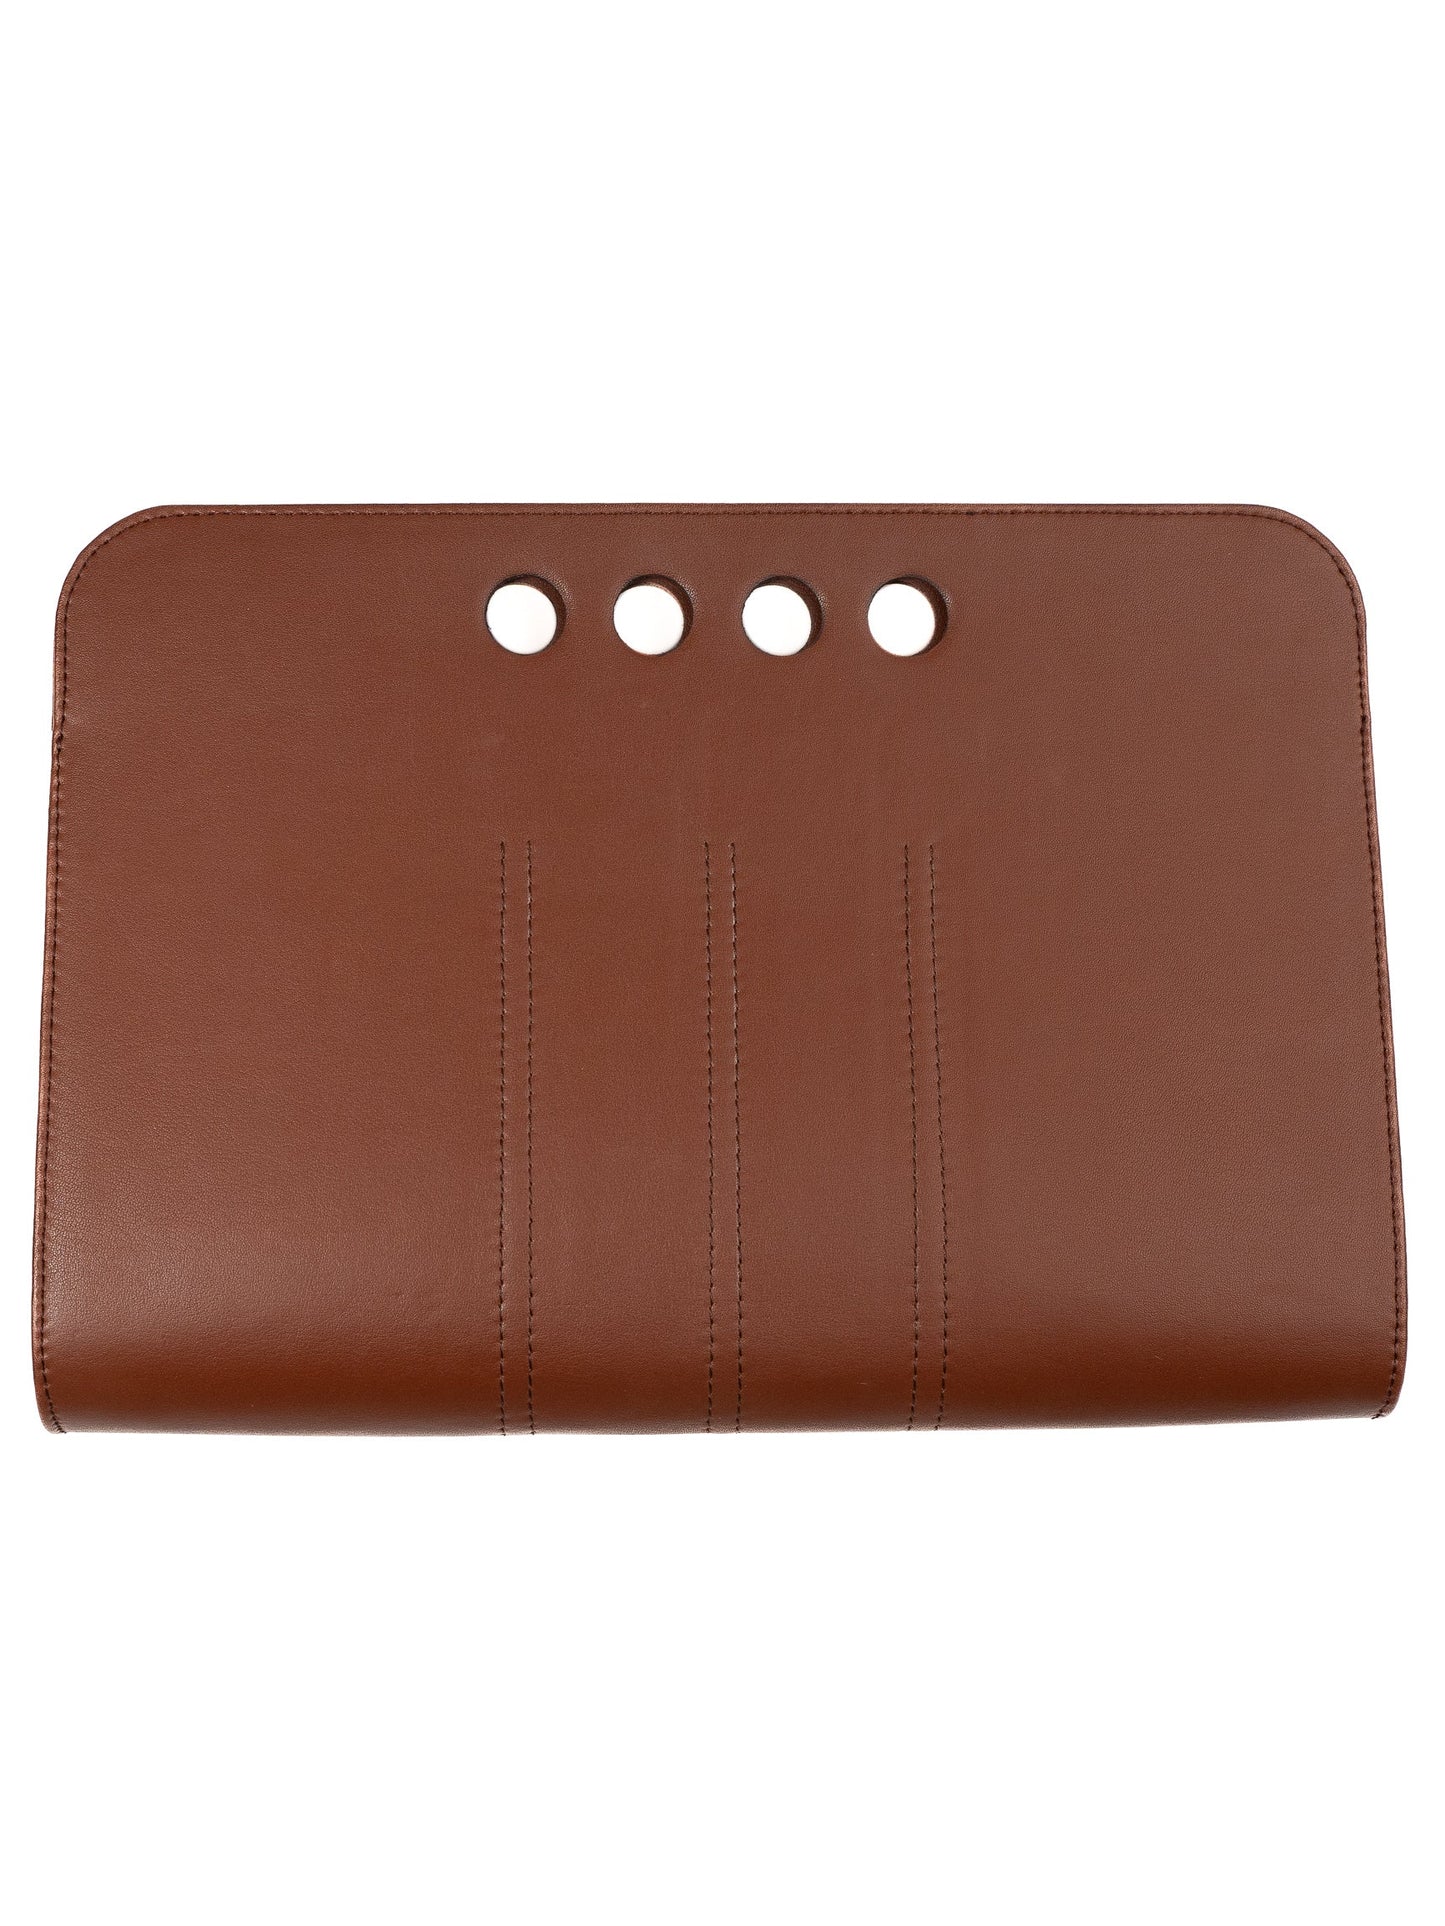 Chic Vegan Leather Clutch - Clay/Large (limited edition)